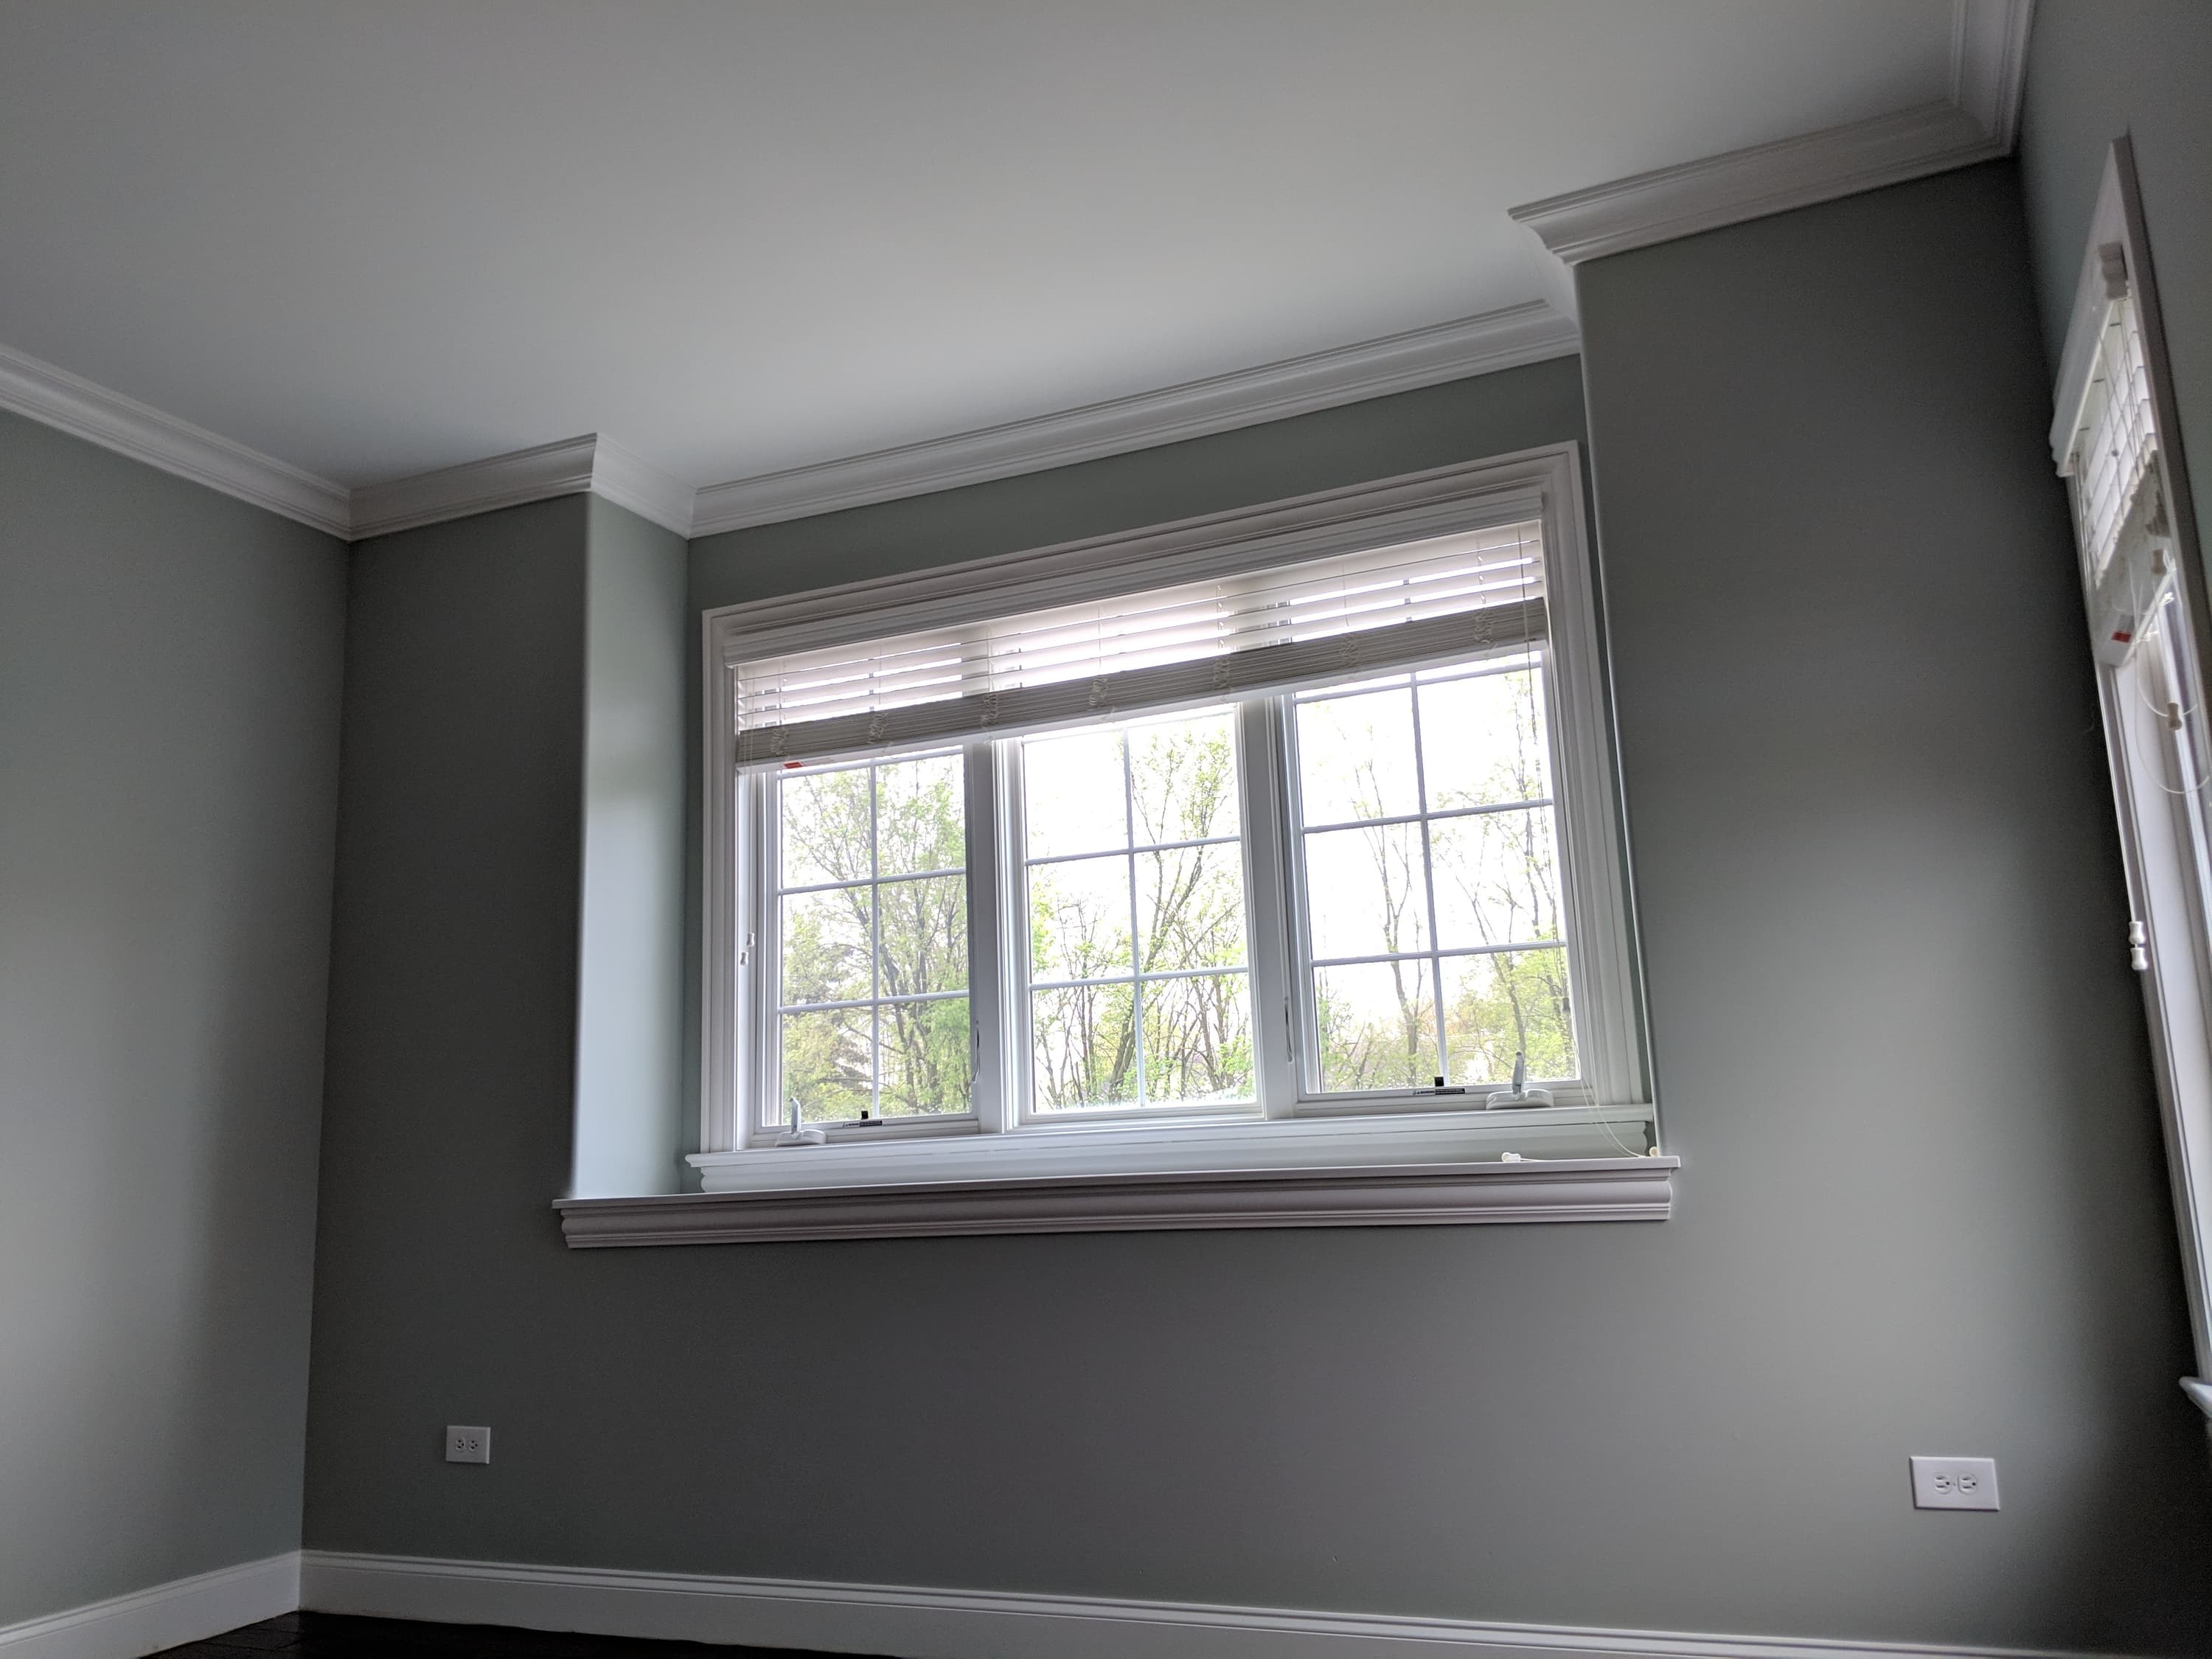 truss uplift cause and solutions - crown molding